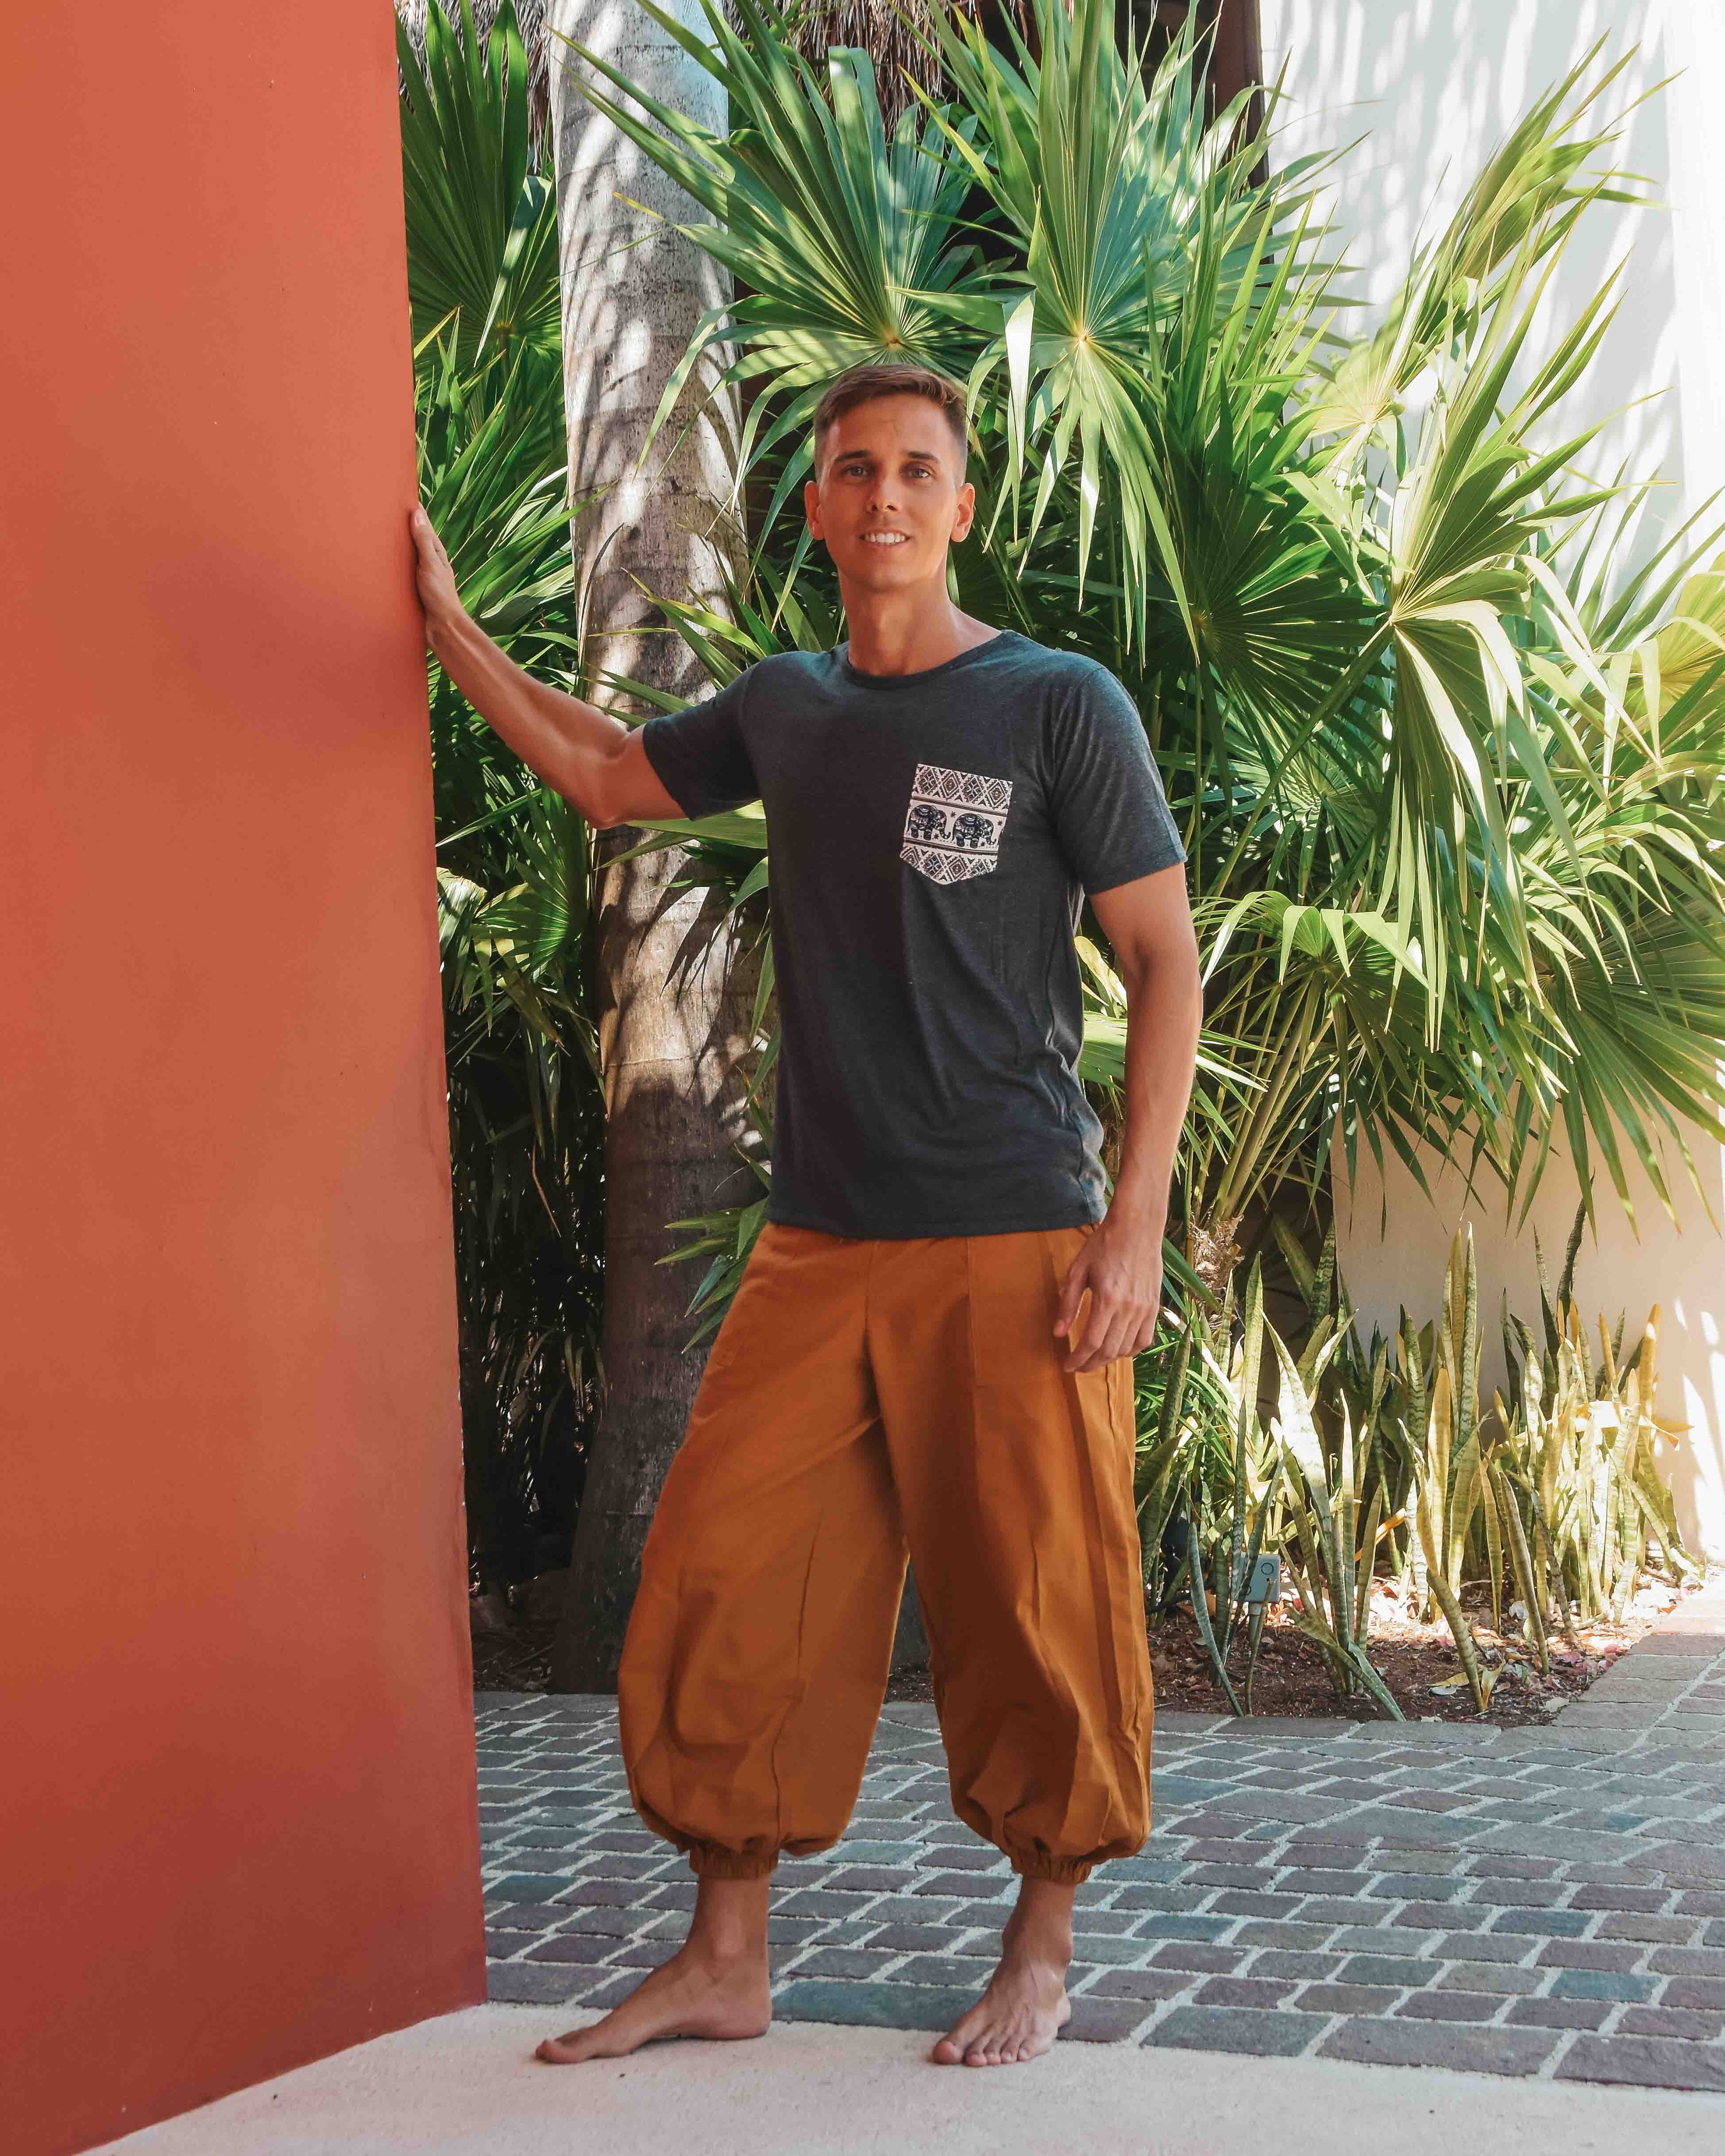 BUDDHA PANTS Elepanta Unisex Casual Pants - Buy Today Elephant Pants Jewelry And Bohemian Clothes Handmade In Thailand Help To Save The Elephants FairTrade And Vegan